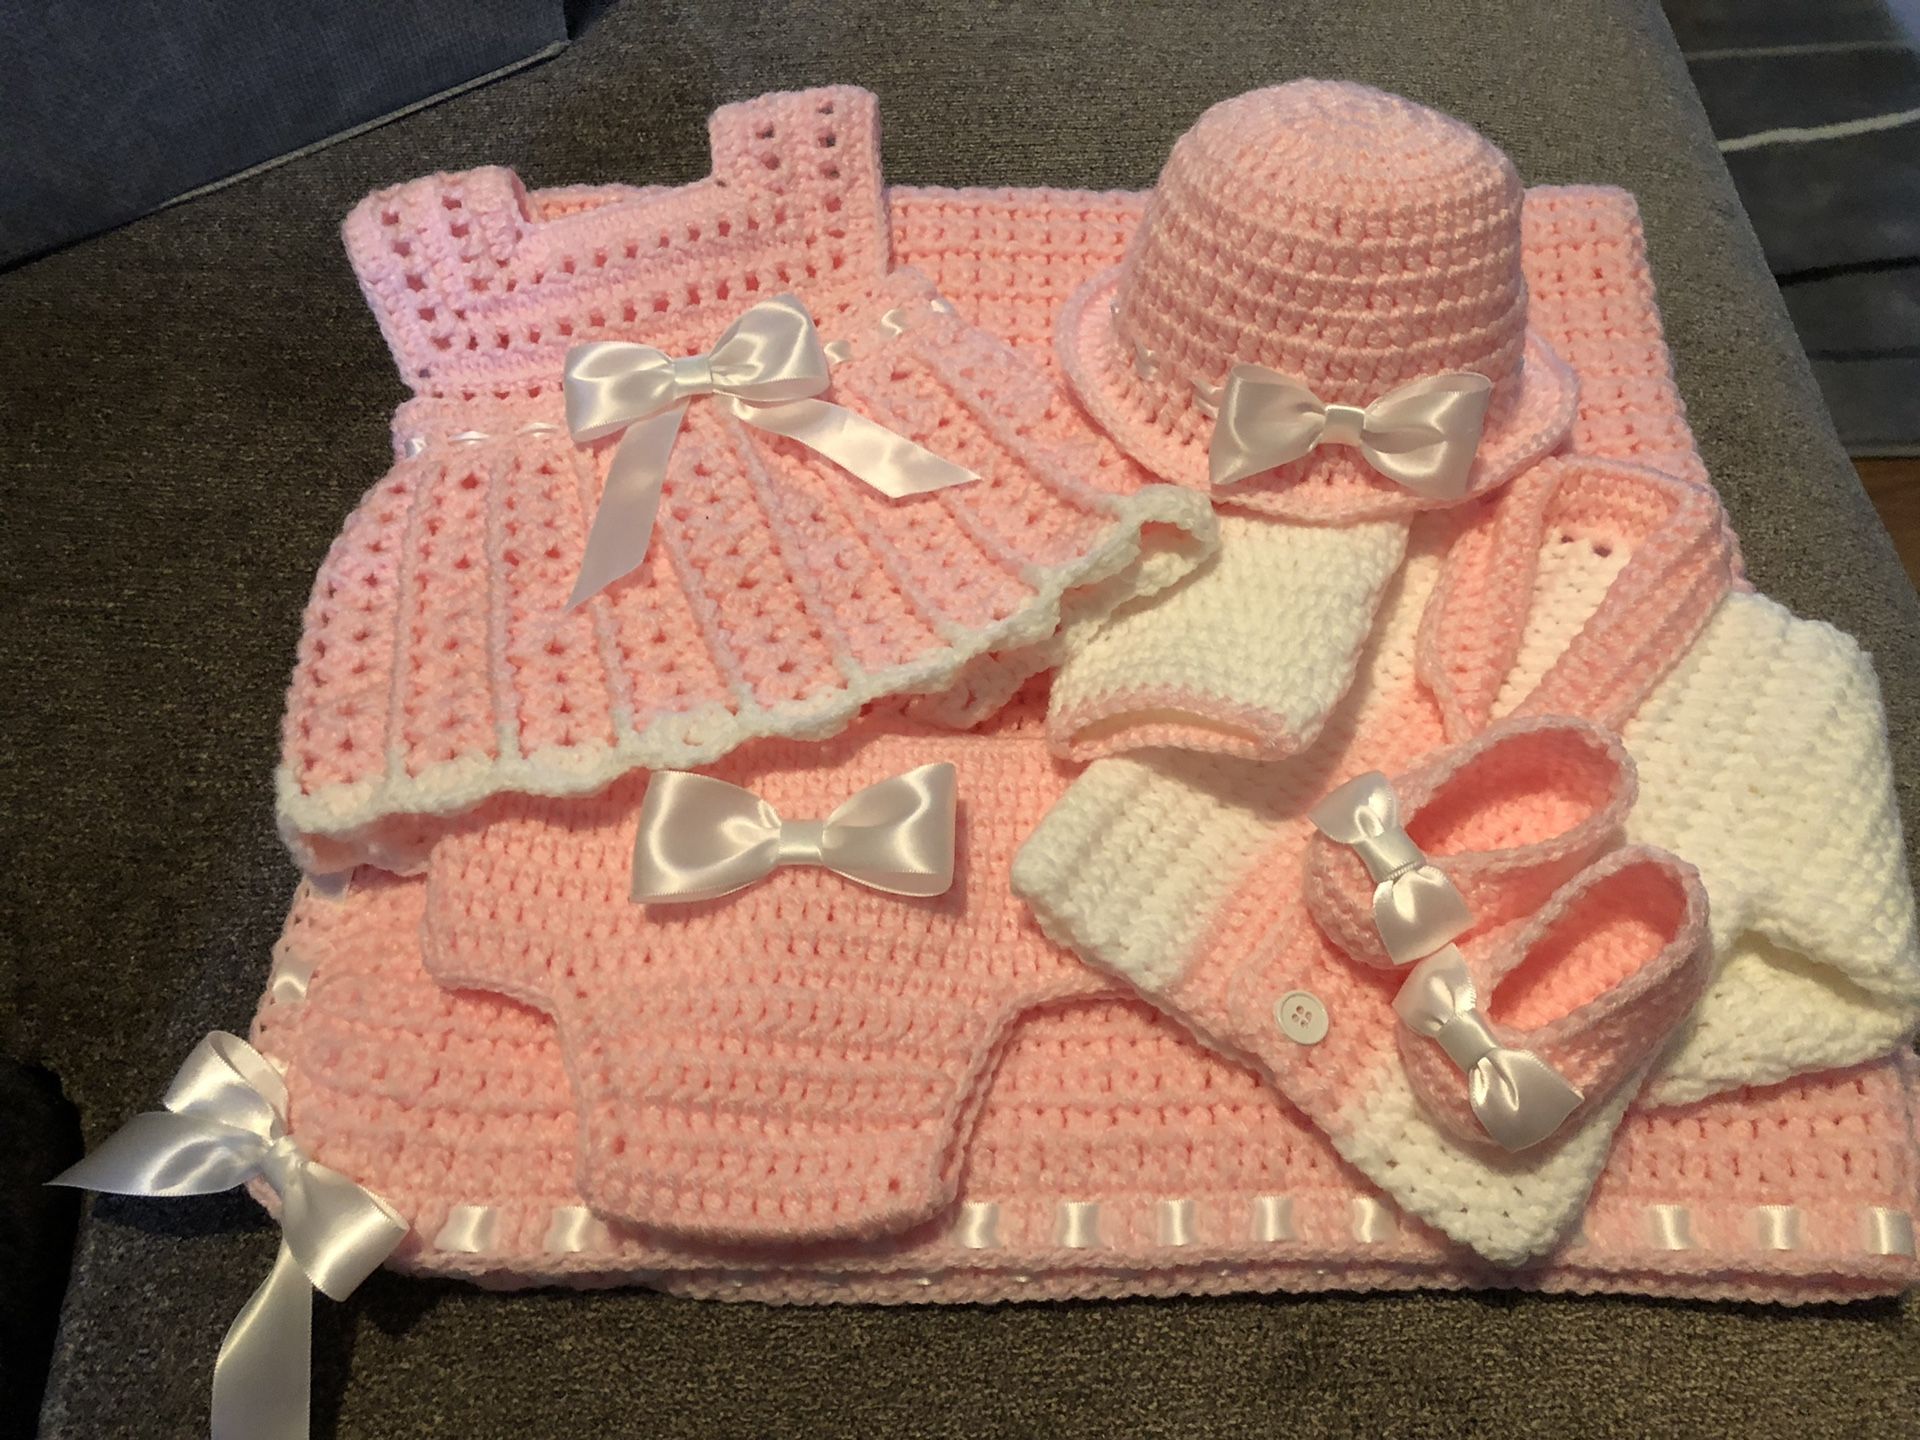 Crochet newborn Blanket, Hat, Sweater, Dress, Diaper cover and shoes